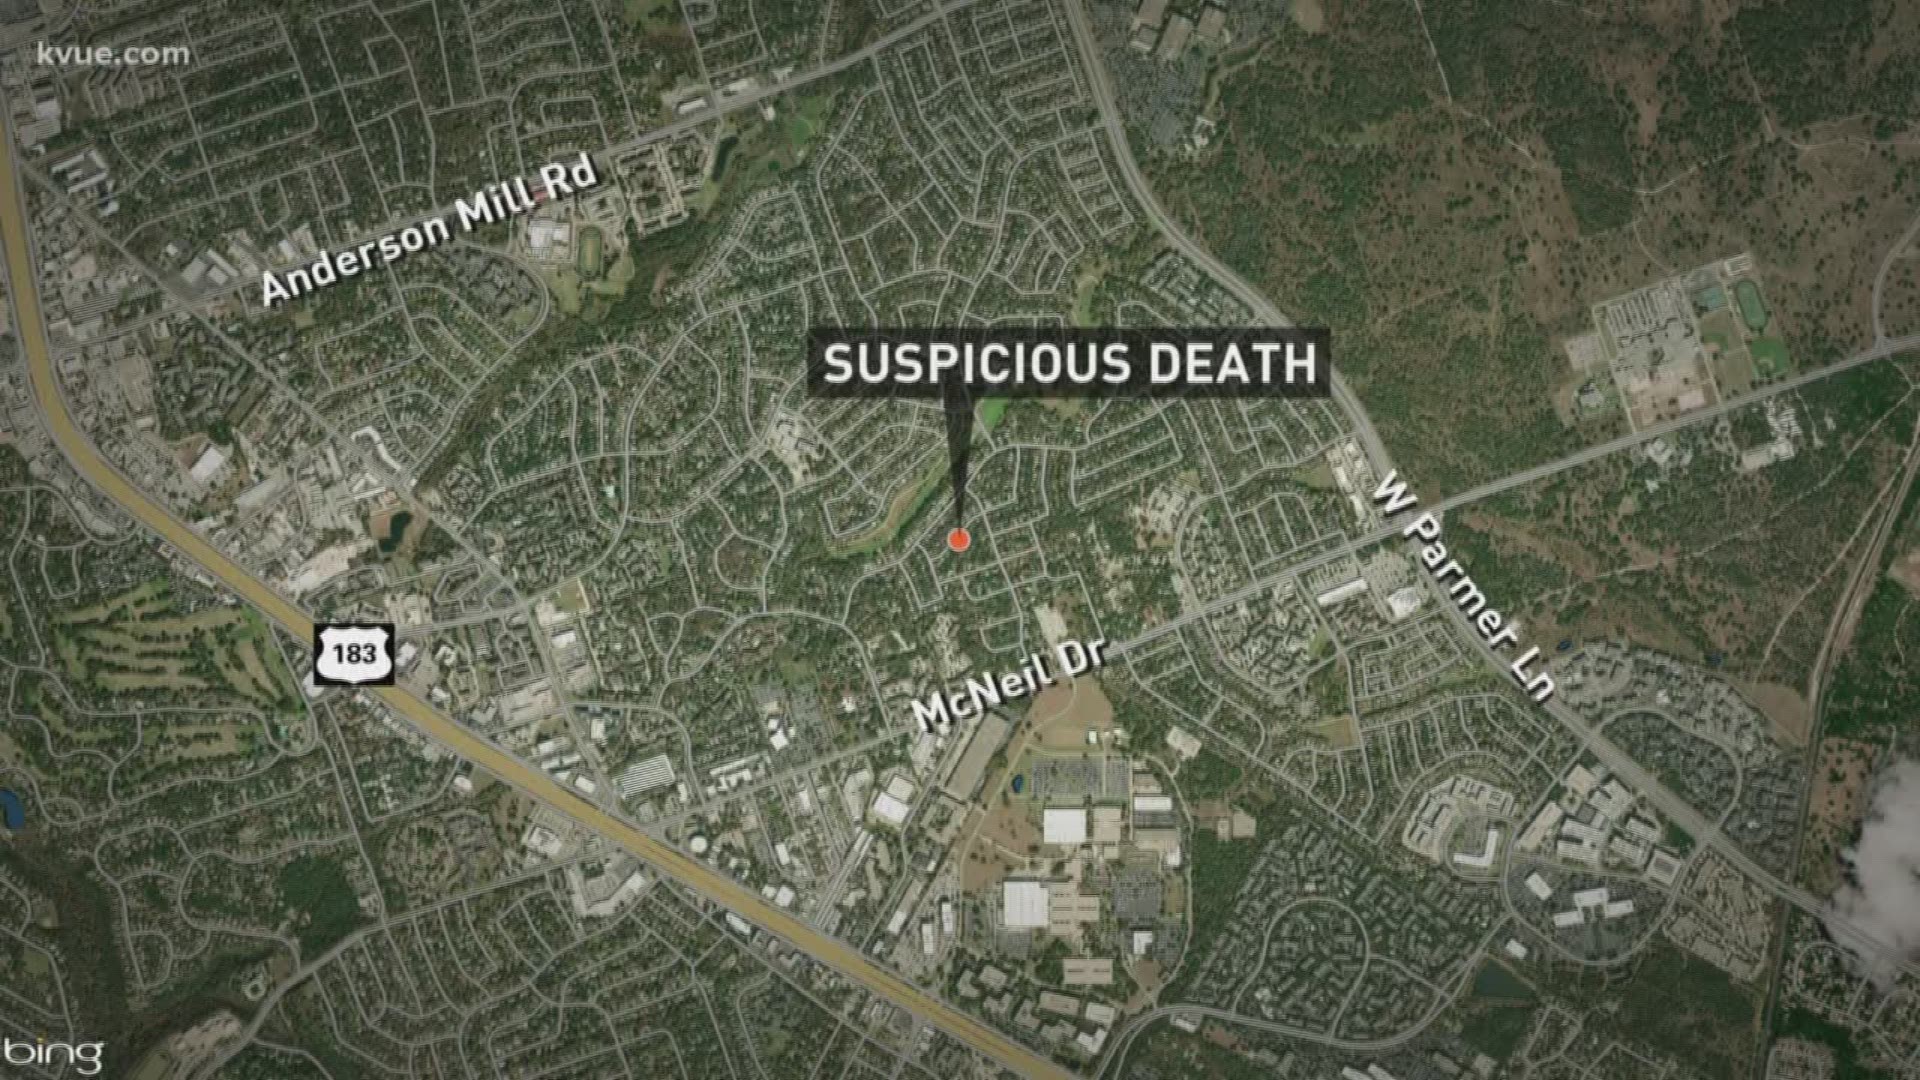 A suspicious death is being investigated in North Austin Sunday morning. Police said there is no further danger to the public.